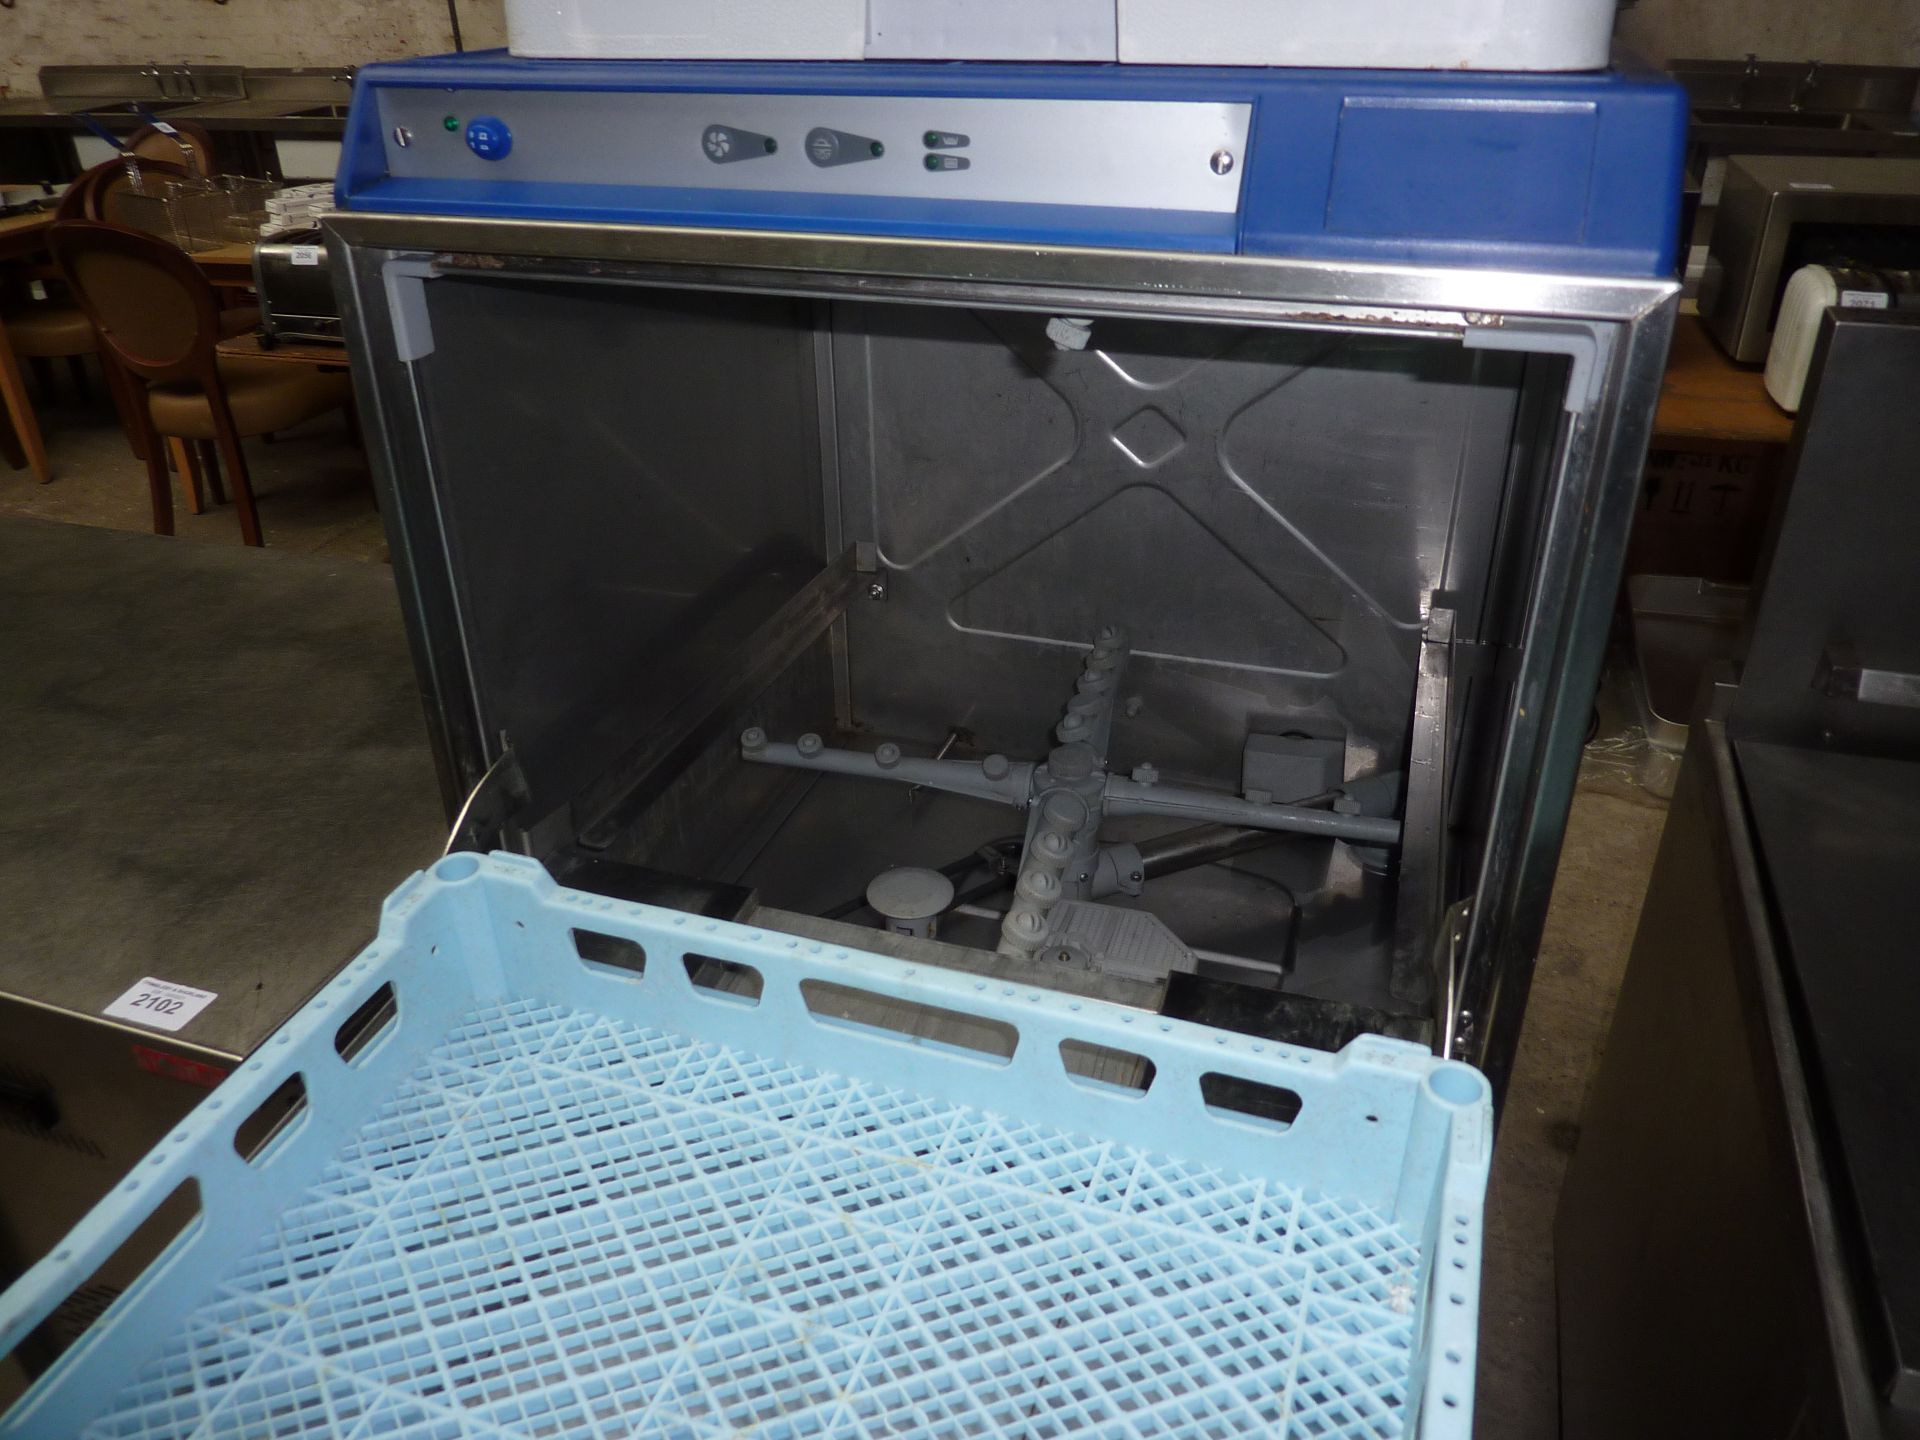 Mini wash commercial stainless steel dishwasher on stand, single phase - Image 2 of 2